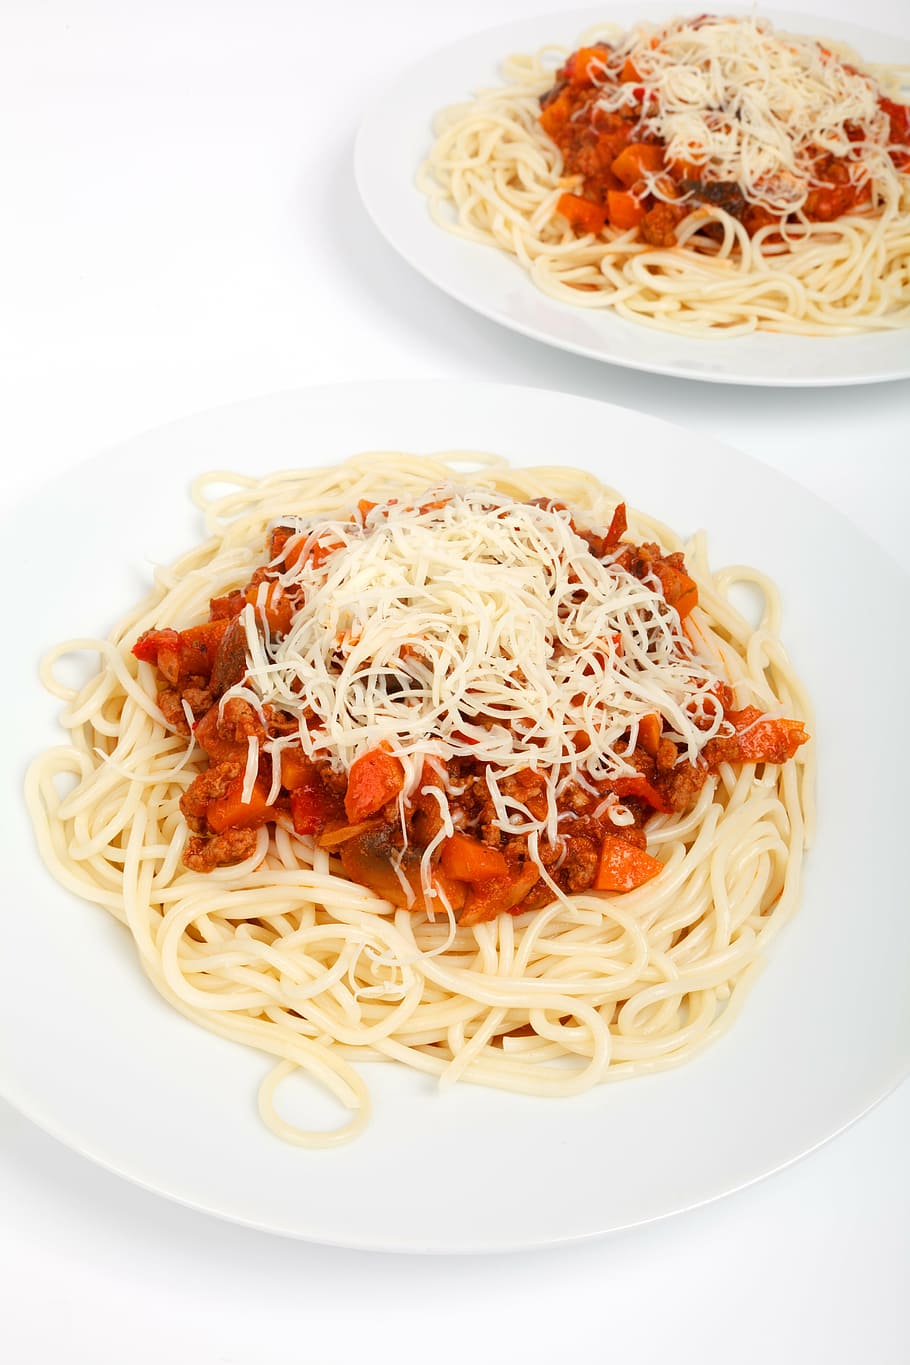 spaghetti, white, ceramic, plate, beef, cheese, cuisine, delicious, dinner, food